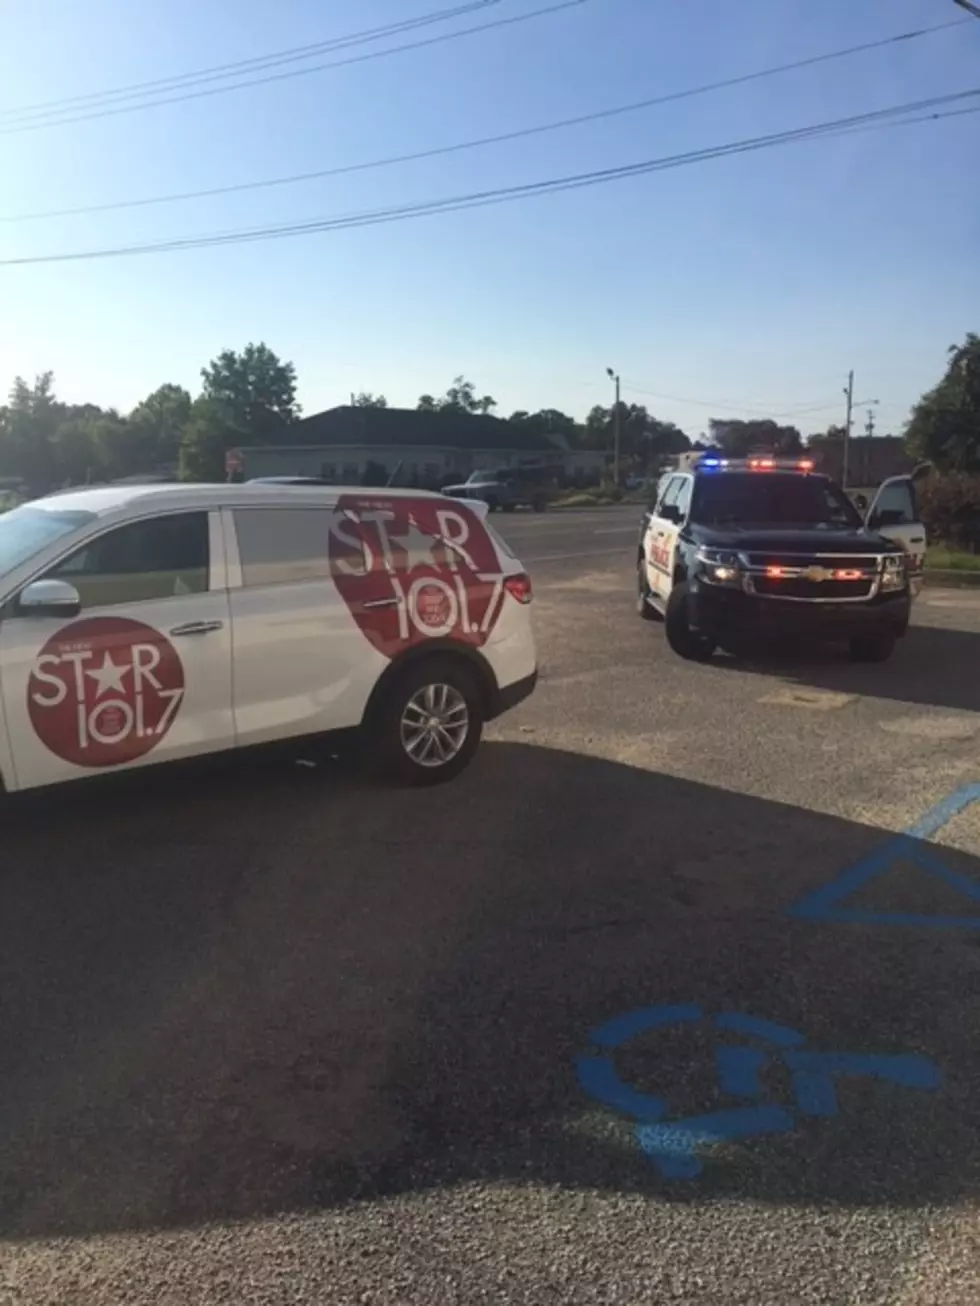 Star 101.7 Official Vehicle Pulled Over For Traffic Violation By Tuscaloosa Police!